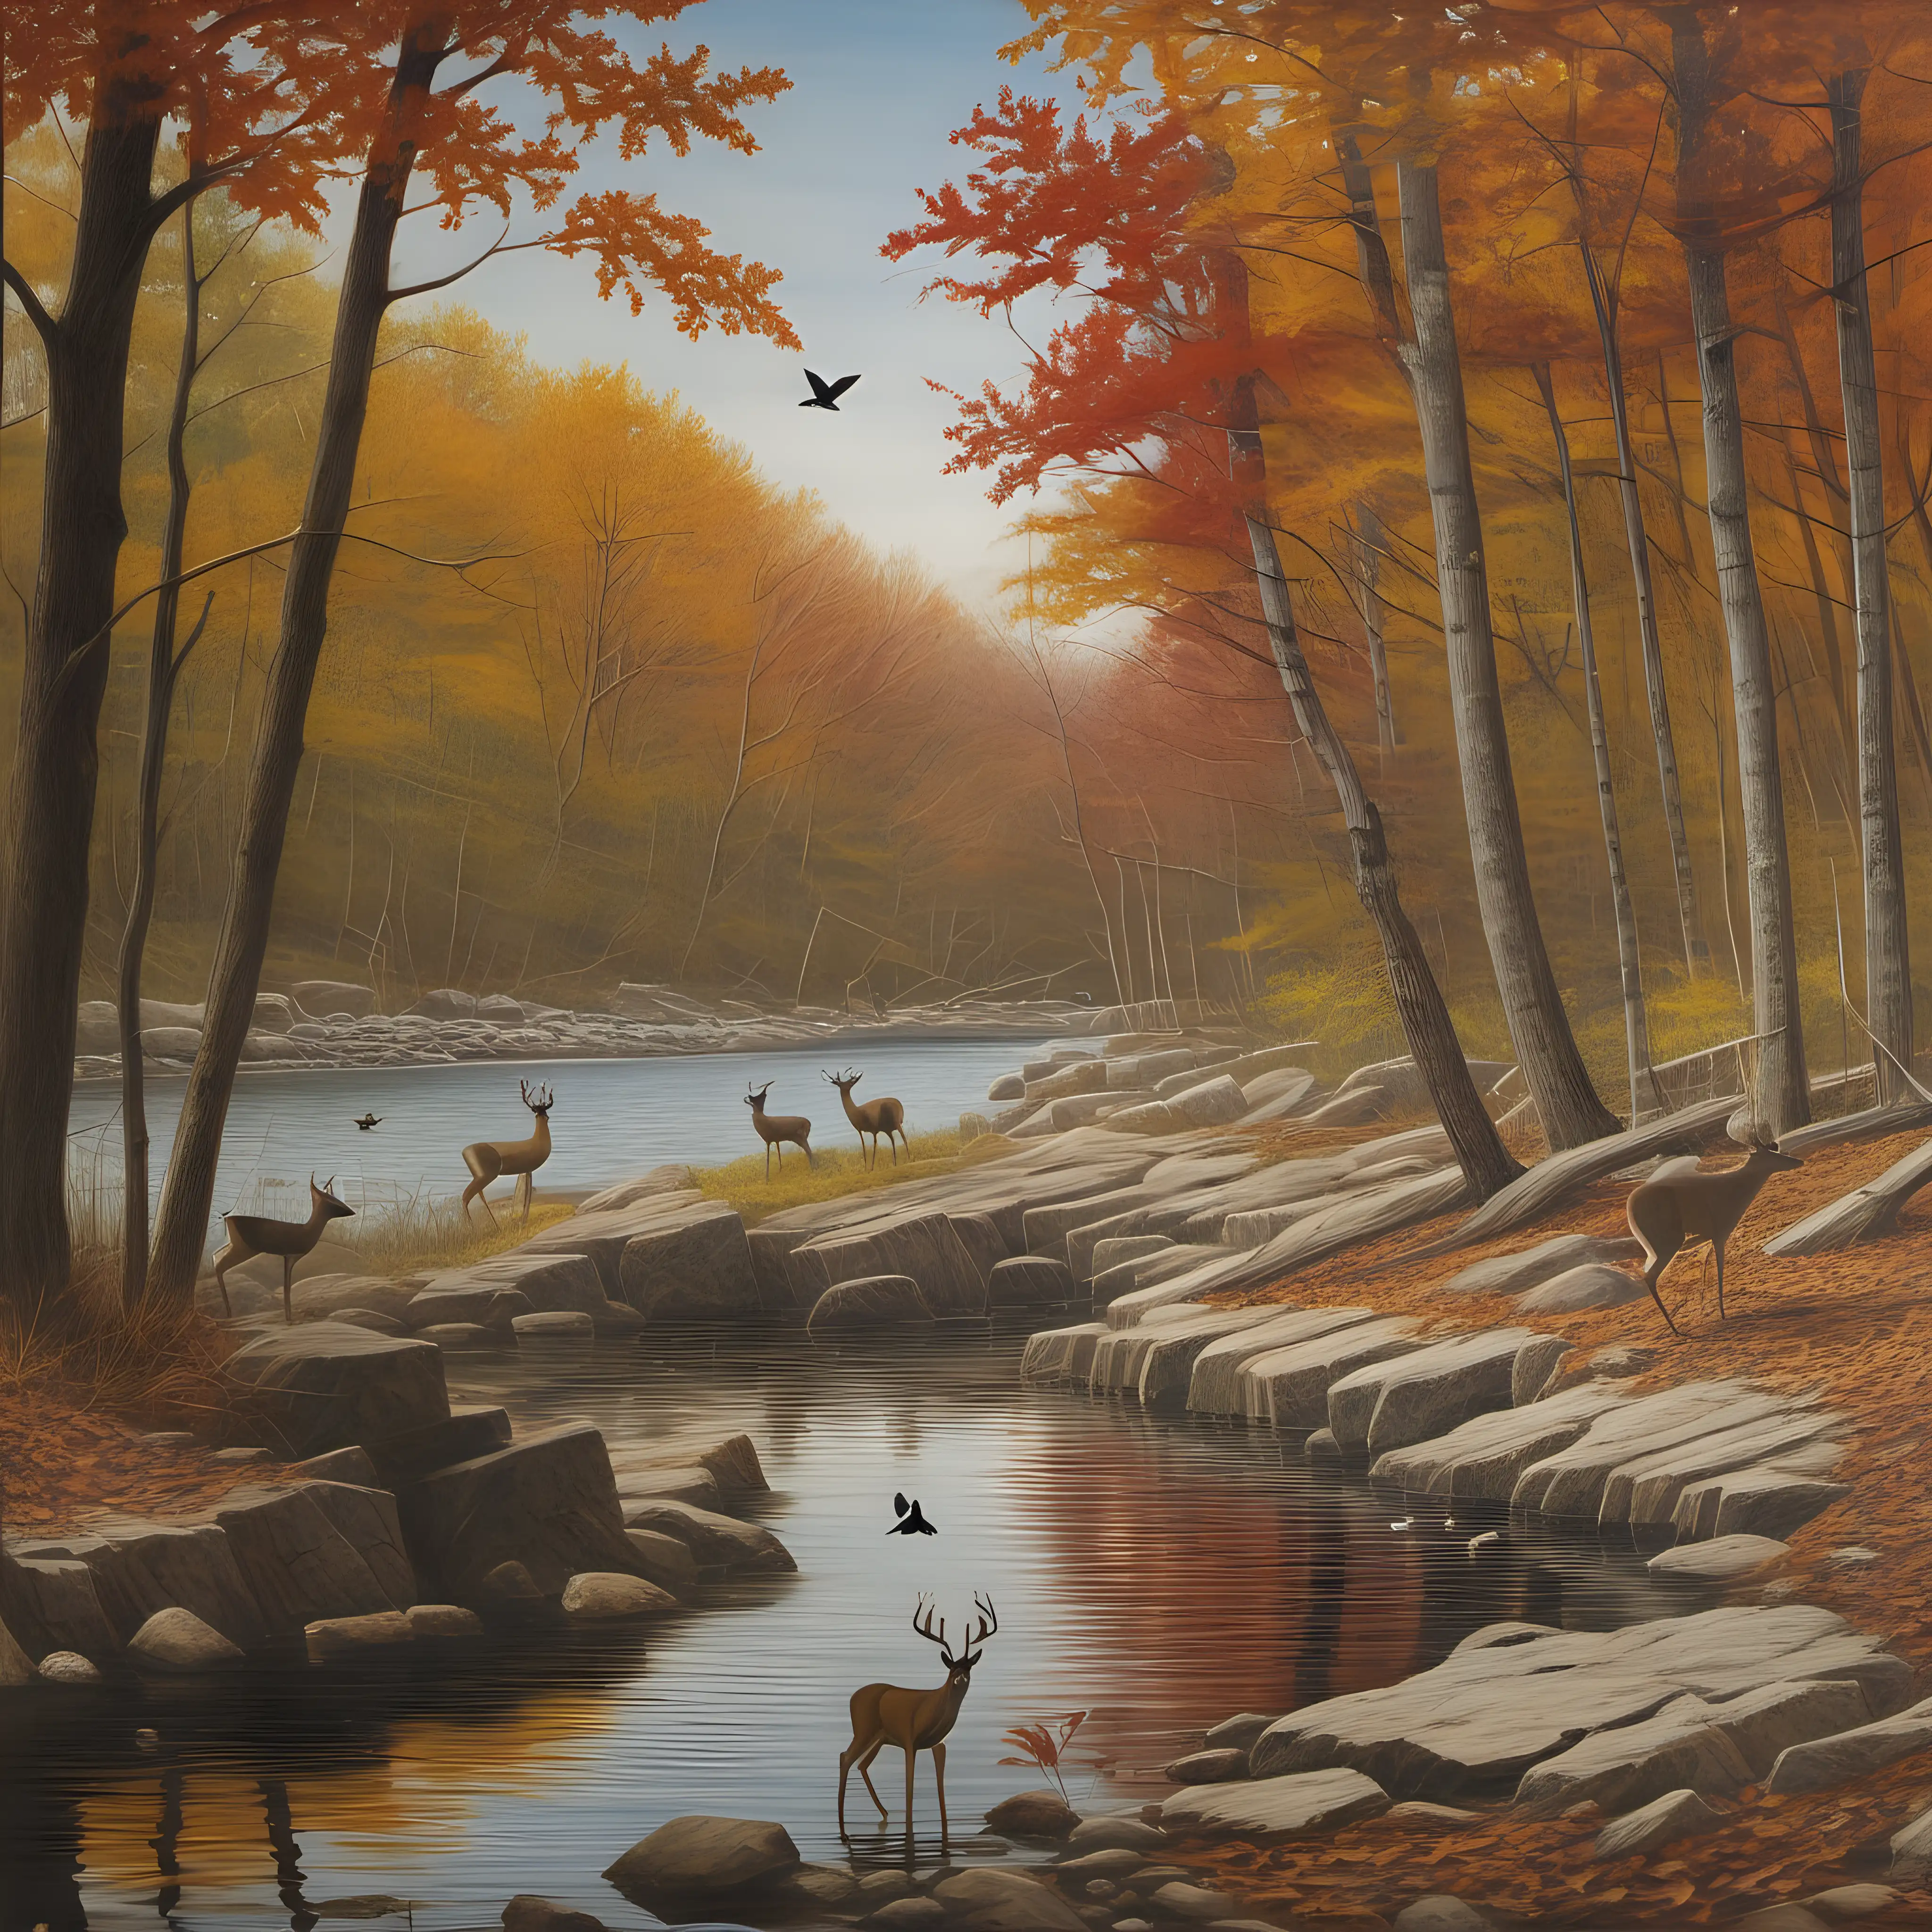 Tranquil Autumn Scene Deer Drinking by Rocky Creek with Songbirds